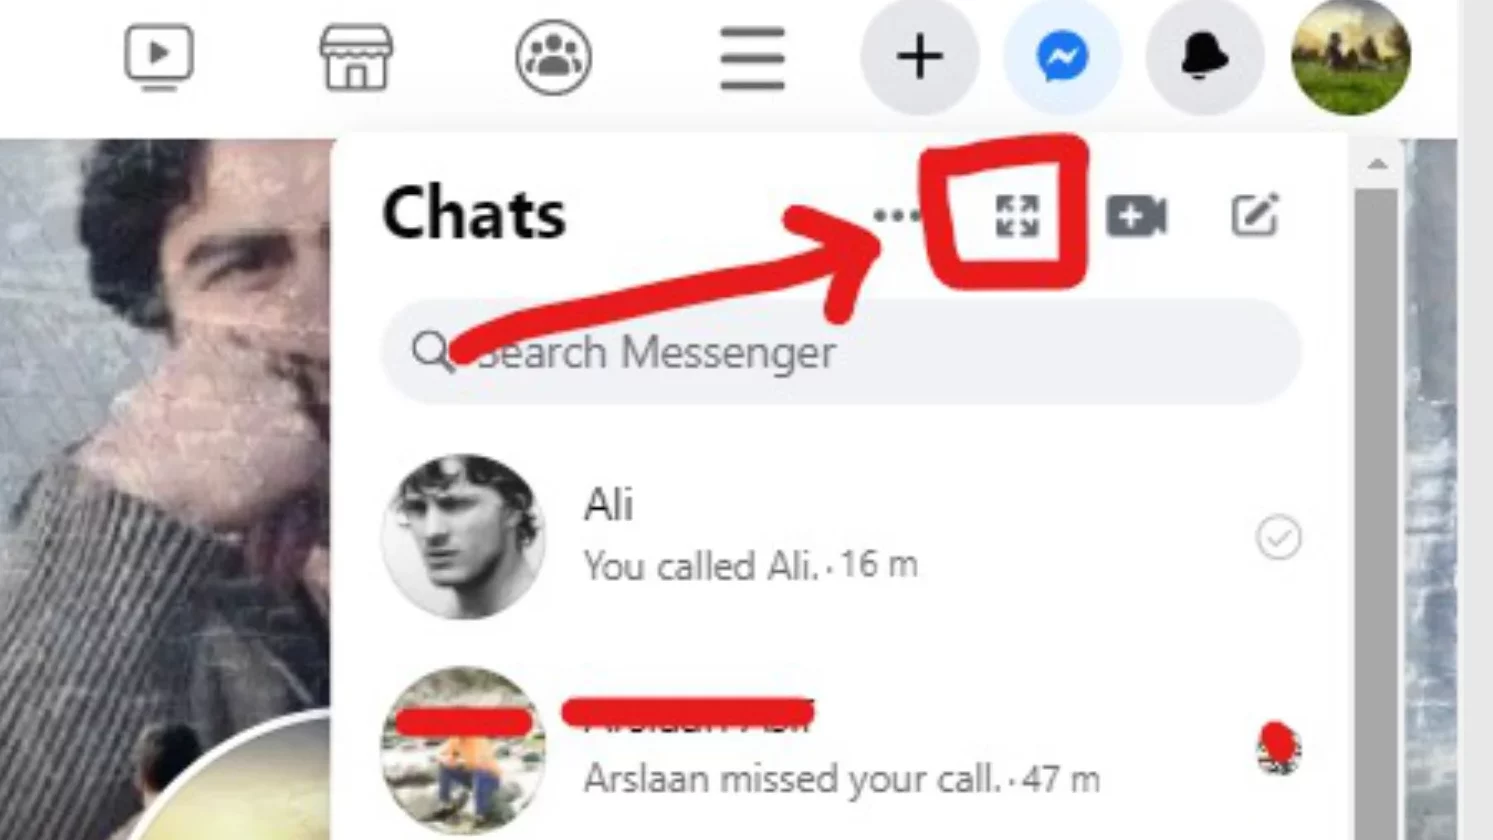 How to Play Games on Messenger